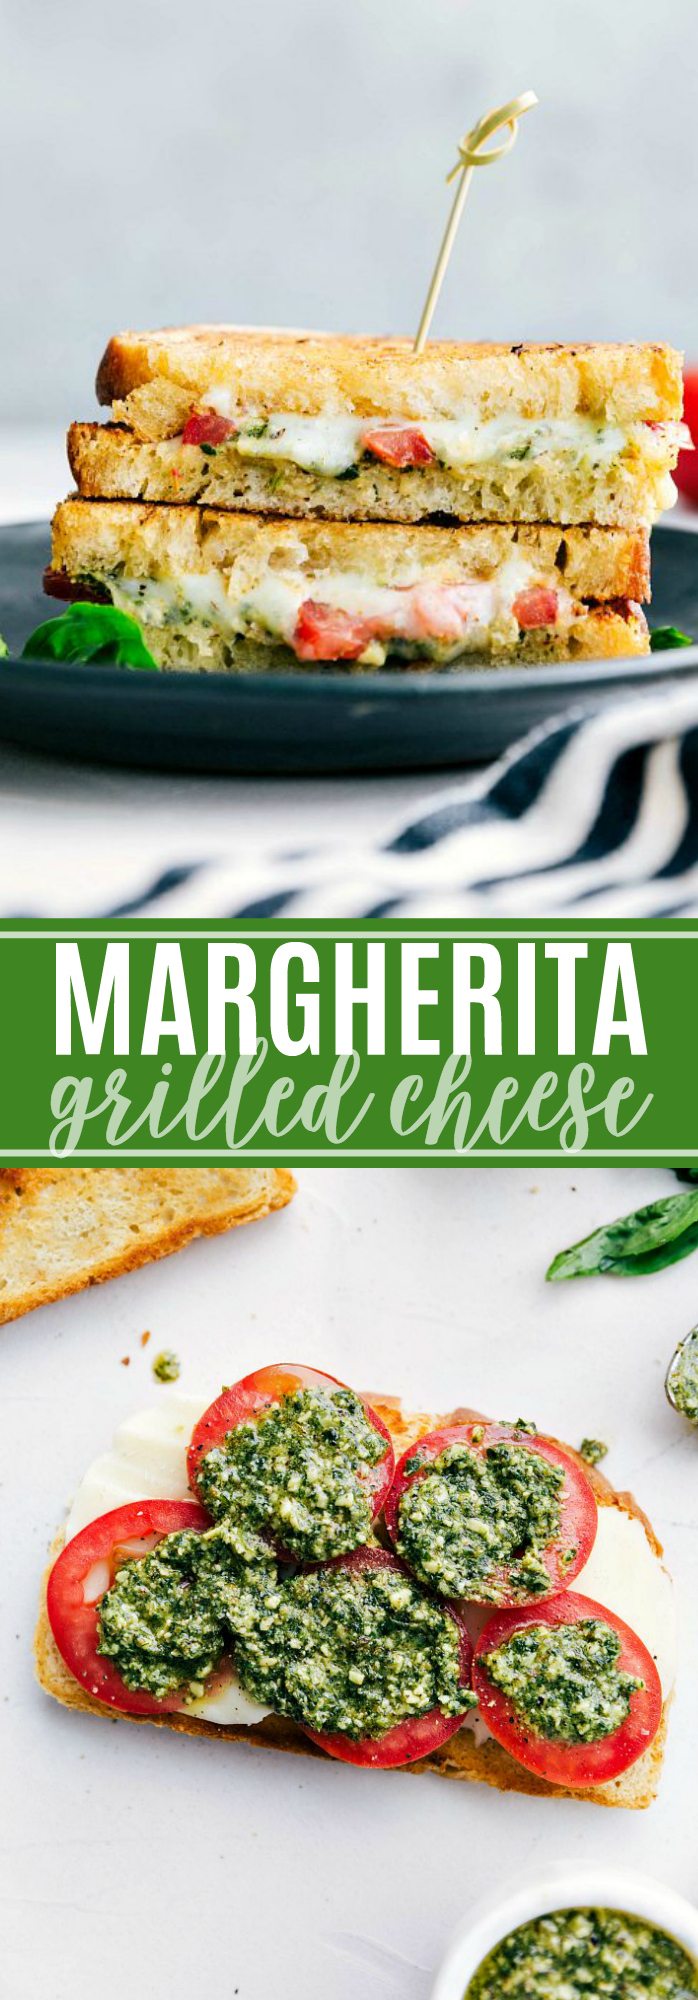 10-minute easy BEST EVER margherita grilled cheese sandwiches | chelseasmessyapron.com | #margherita #grilled #cheese #sandwich #easy #kidfriendly #pesto #basil #tomato #mozzarella #sandwich #lunch #easy